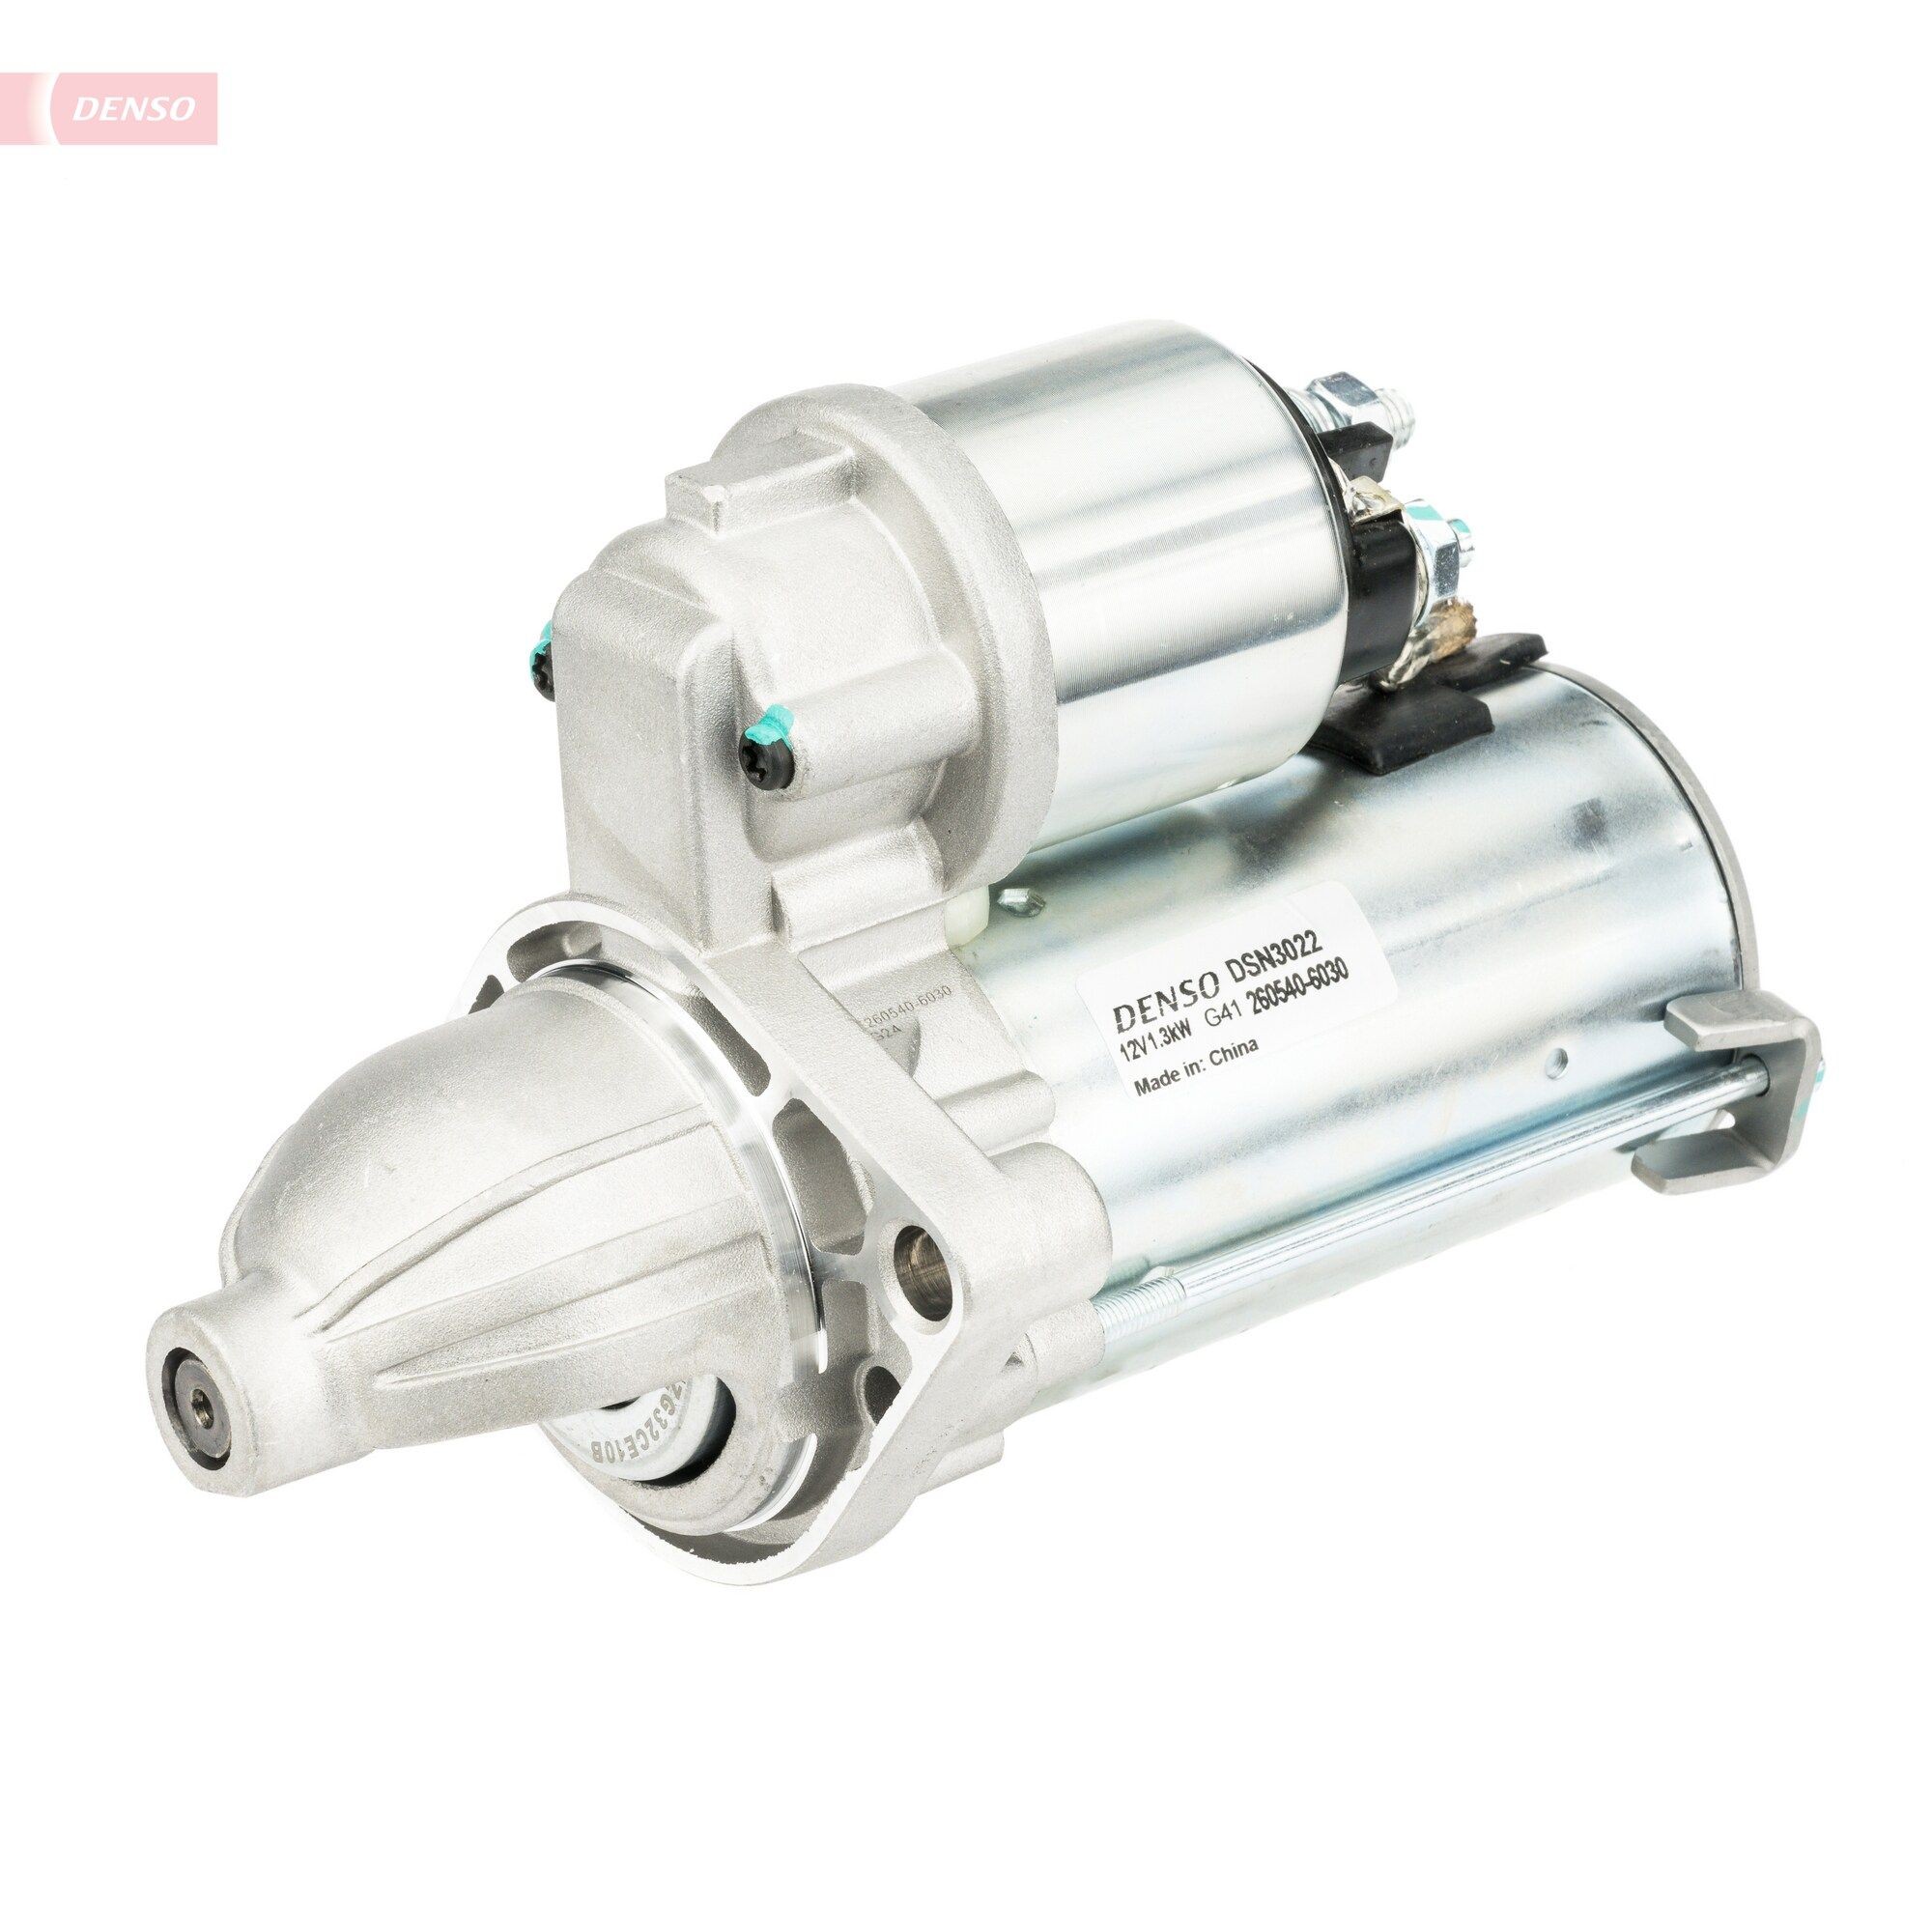 Original DSN3022 DENSO Starter experience and price